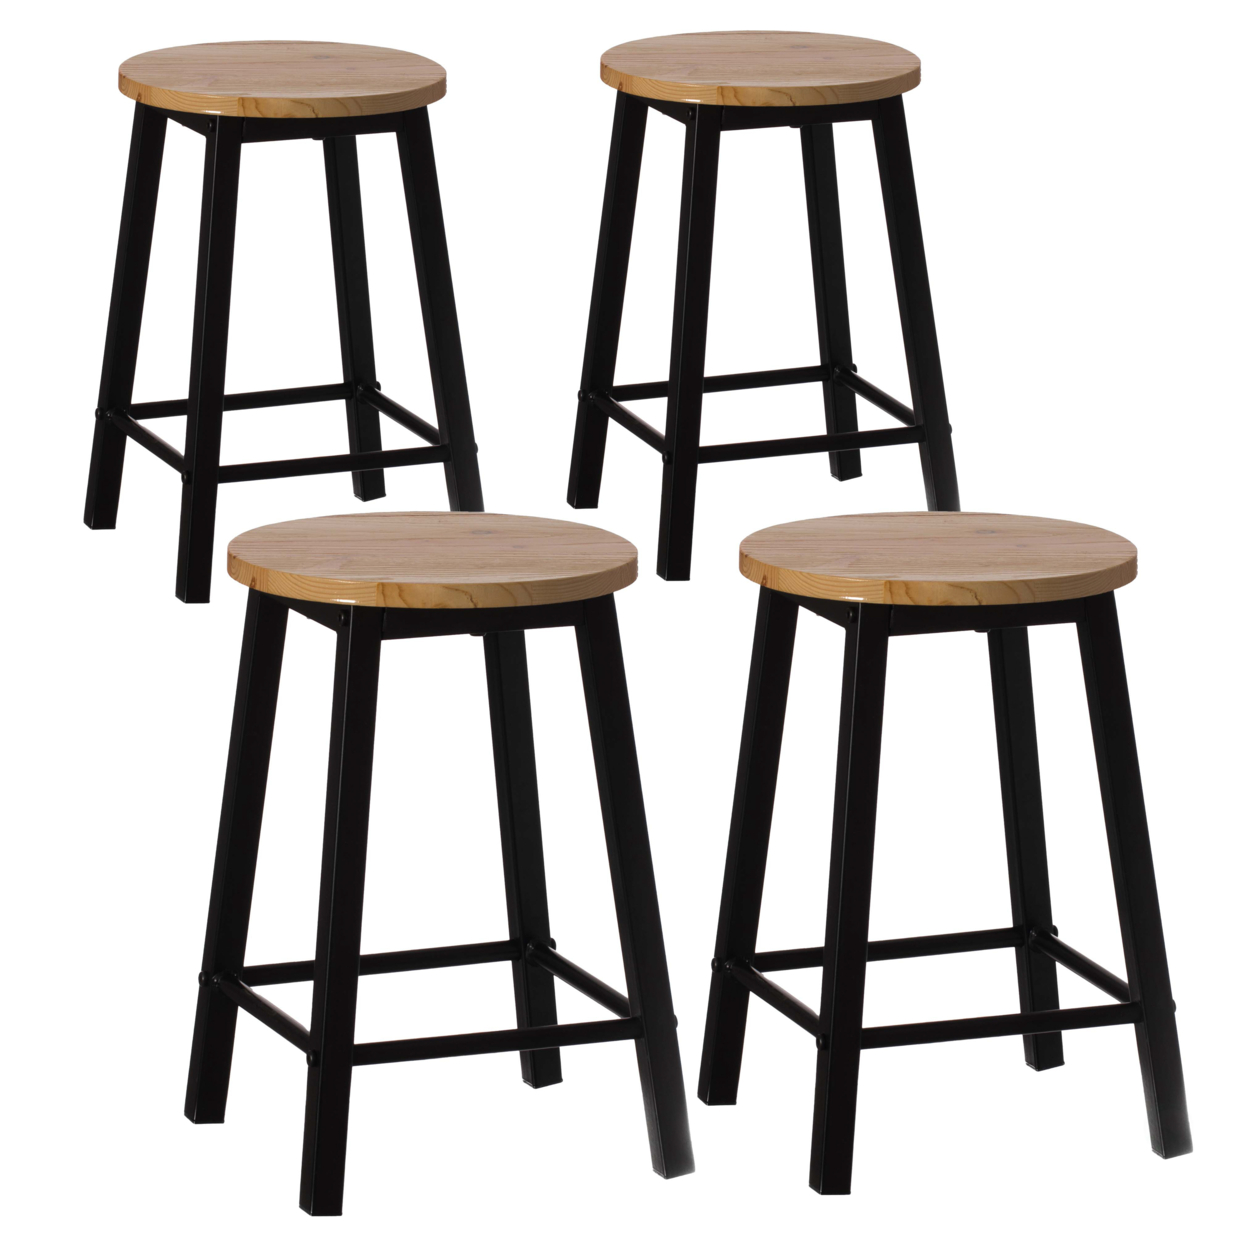 17.5 High Wooden Black Round Bar Stool With Footrest For Indoor And Outdoor - Set Of 4